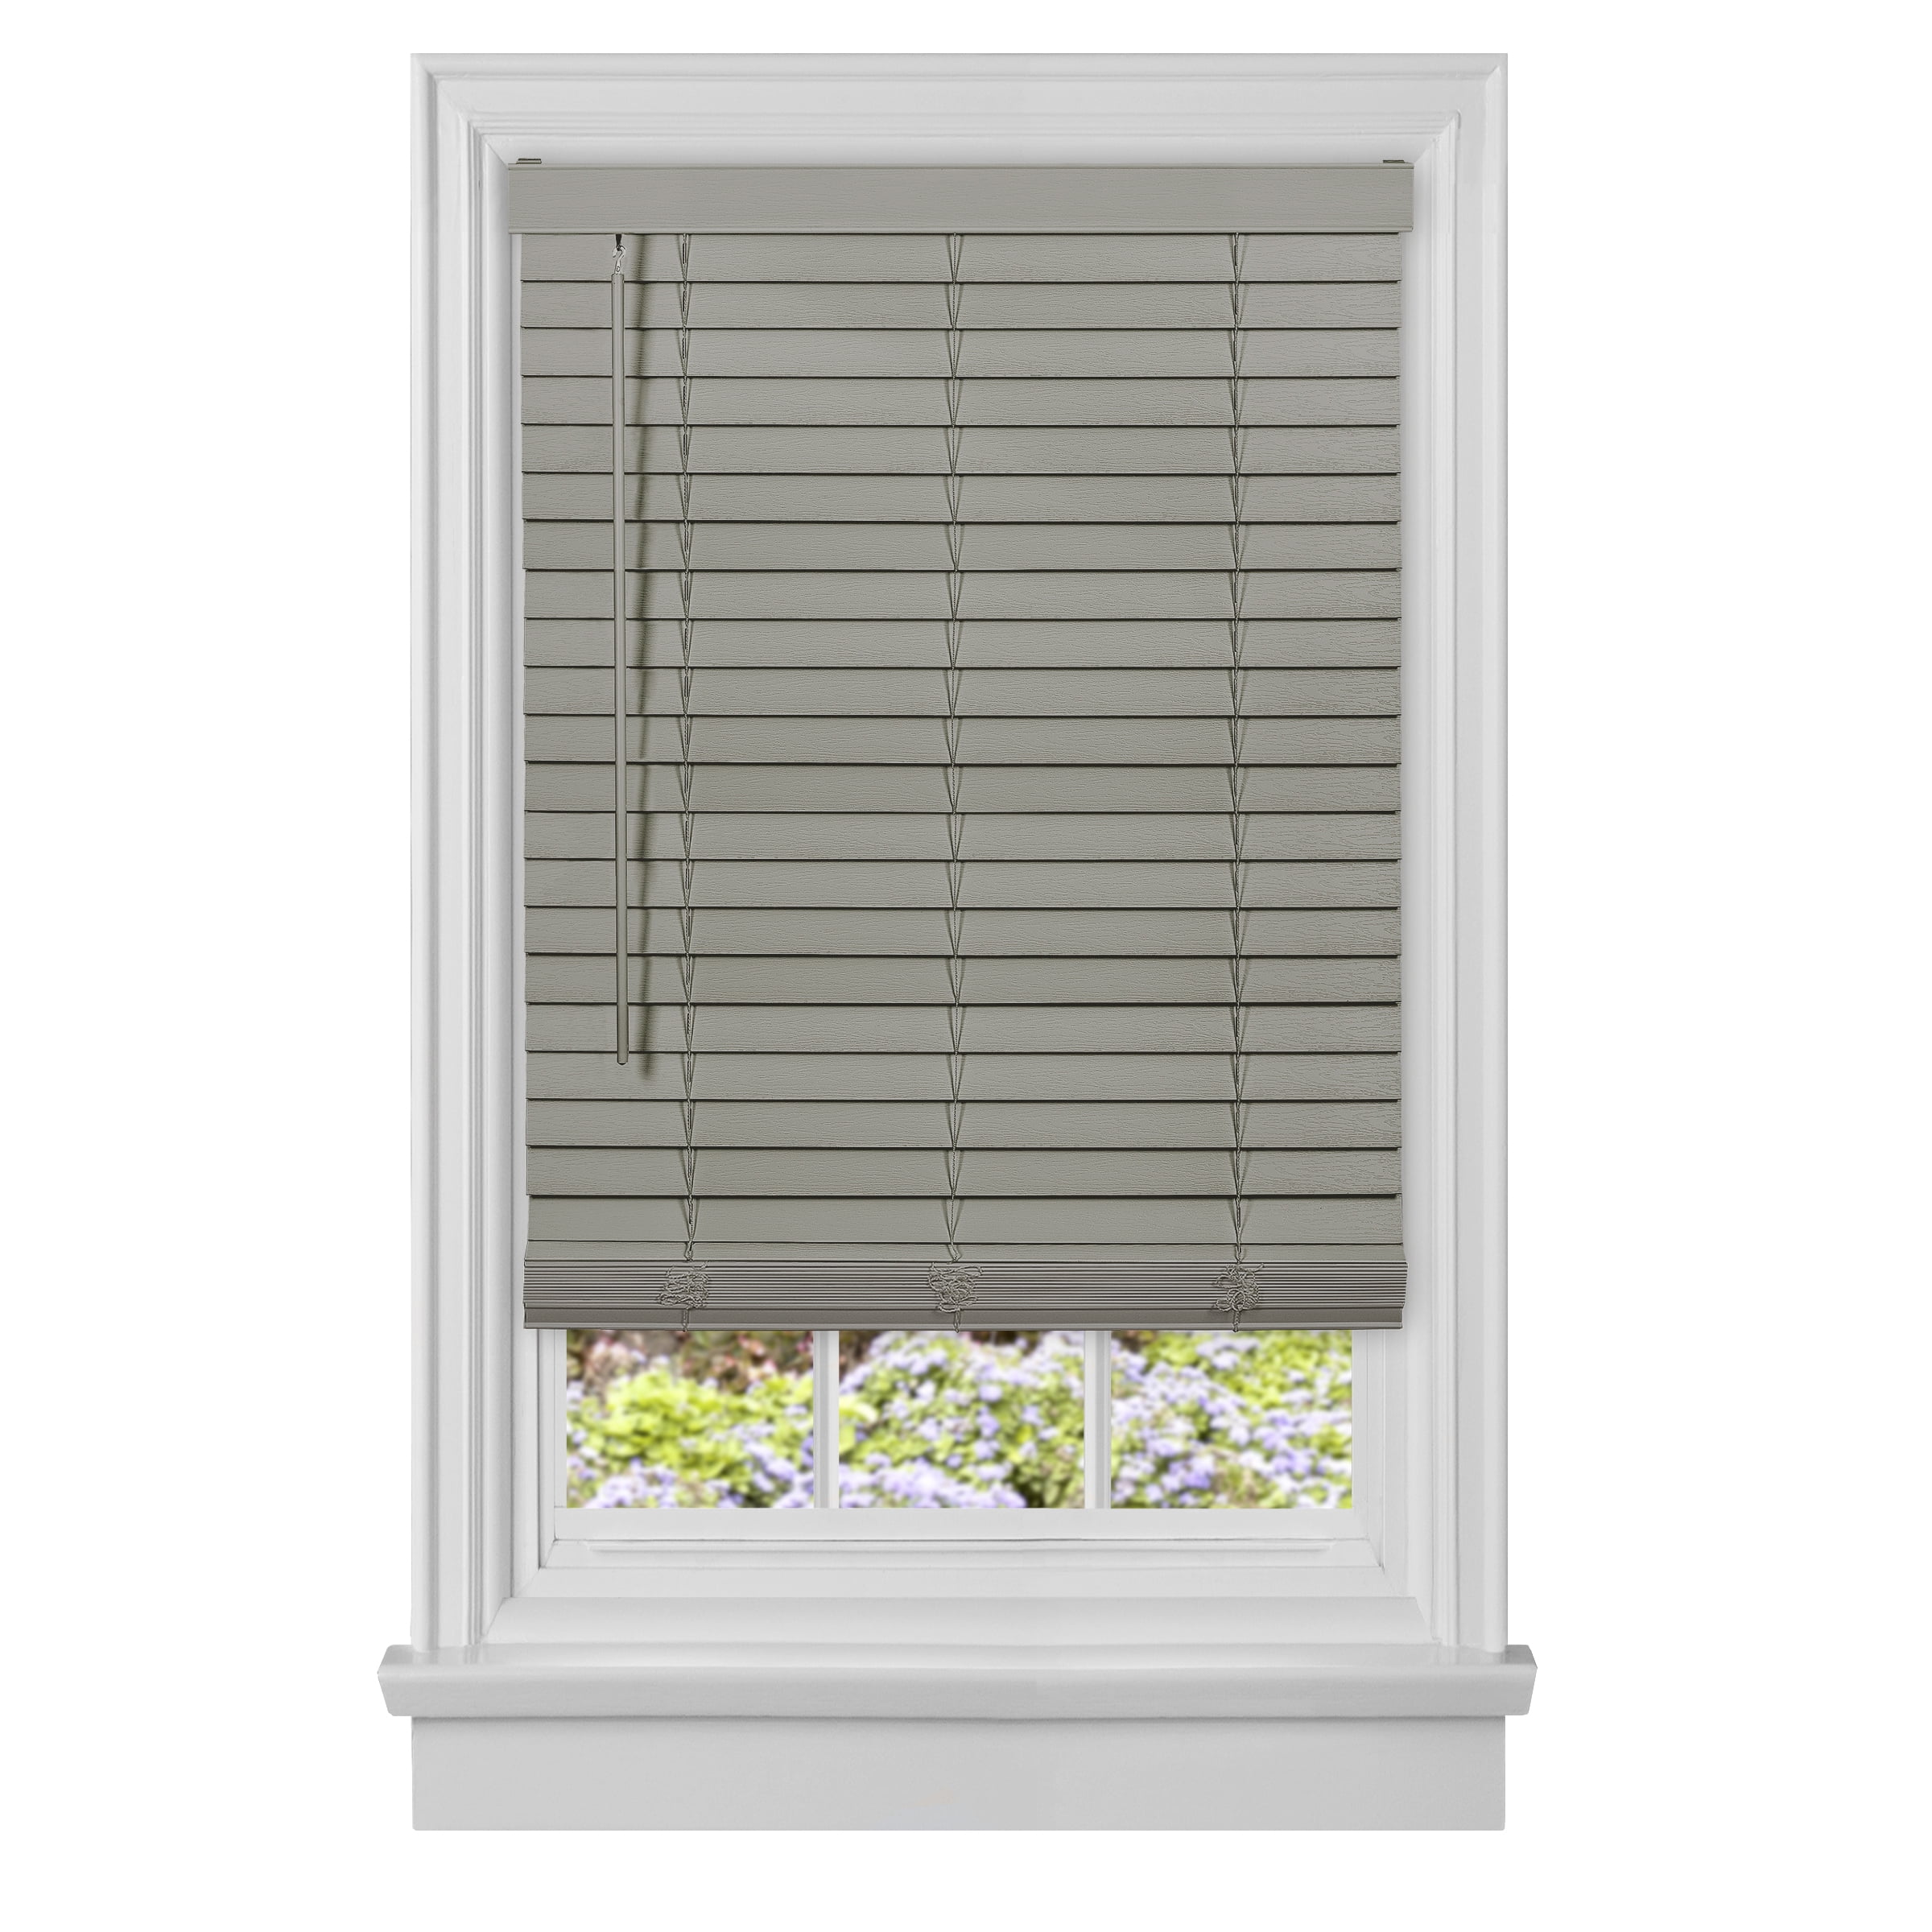 Picture of Achim MFG232GY02 32 x 64 in. Cordless GII Madera Falsa 2 in. Faux Wood Plantation Blind - Grey